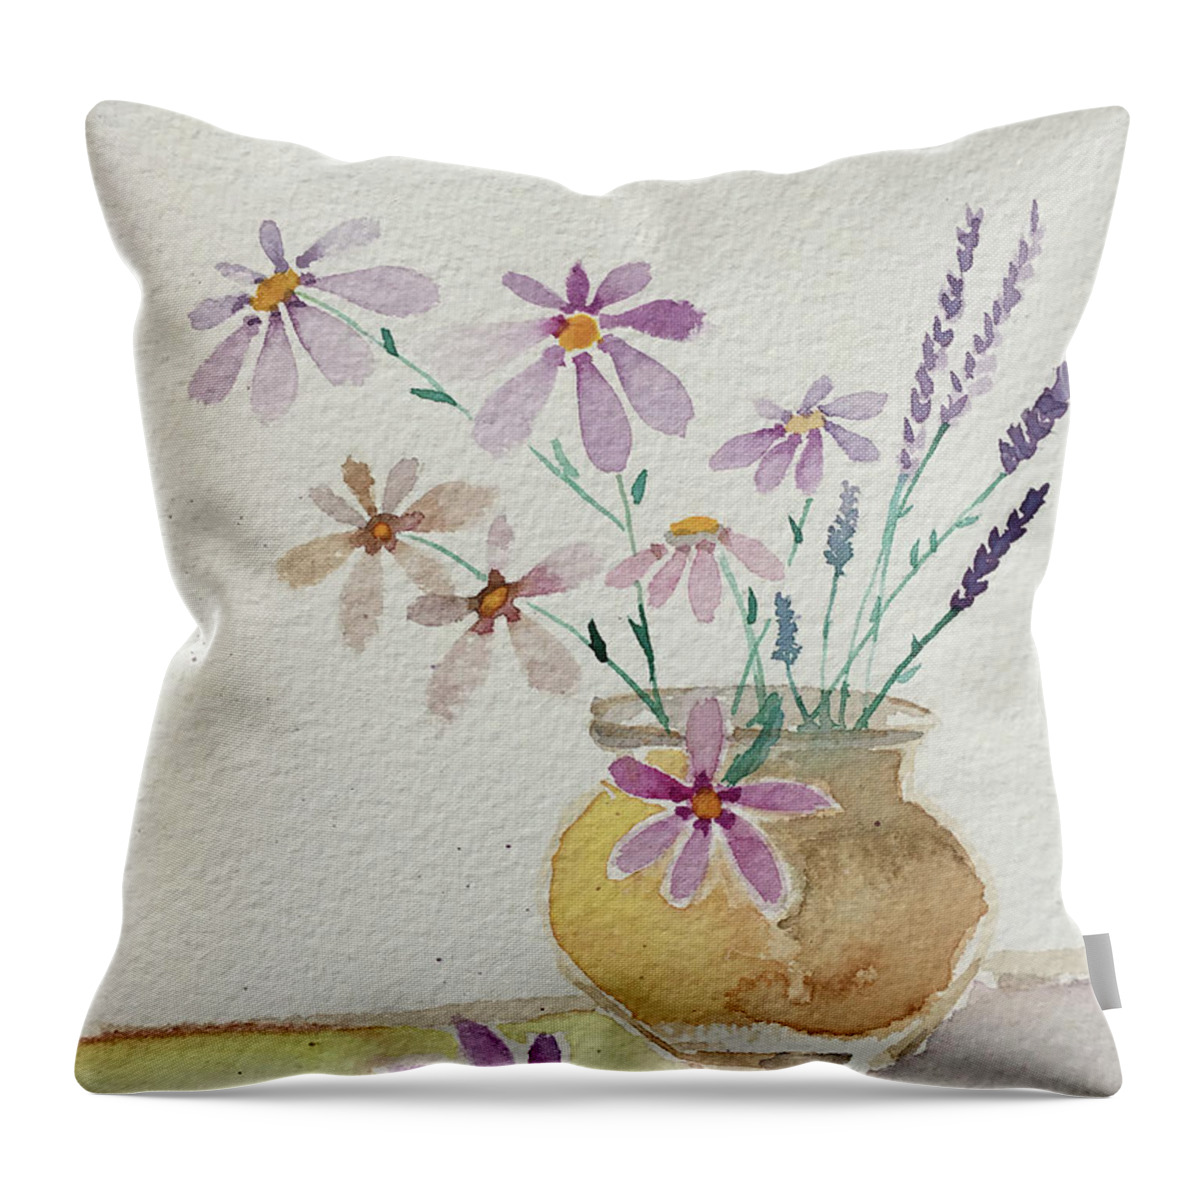 Daisies Throw Pillow featuring the painting Daisies and Lavender by Roxy Rich